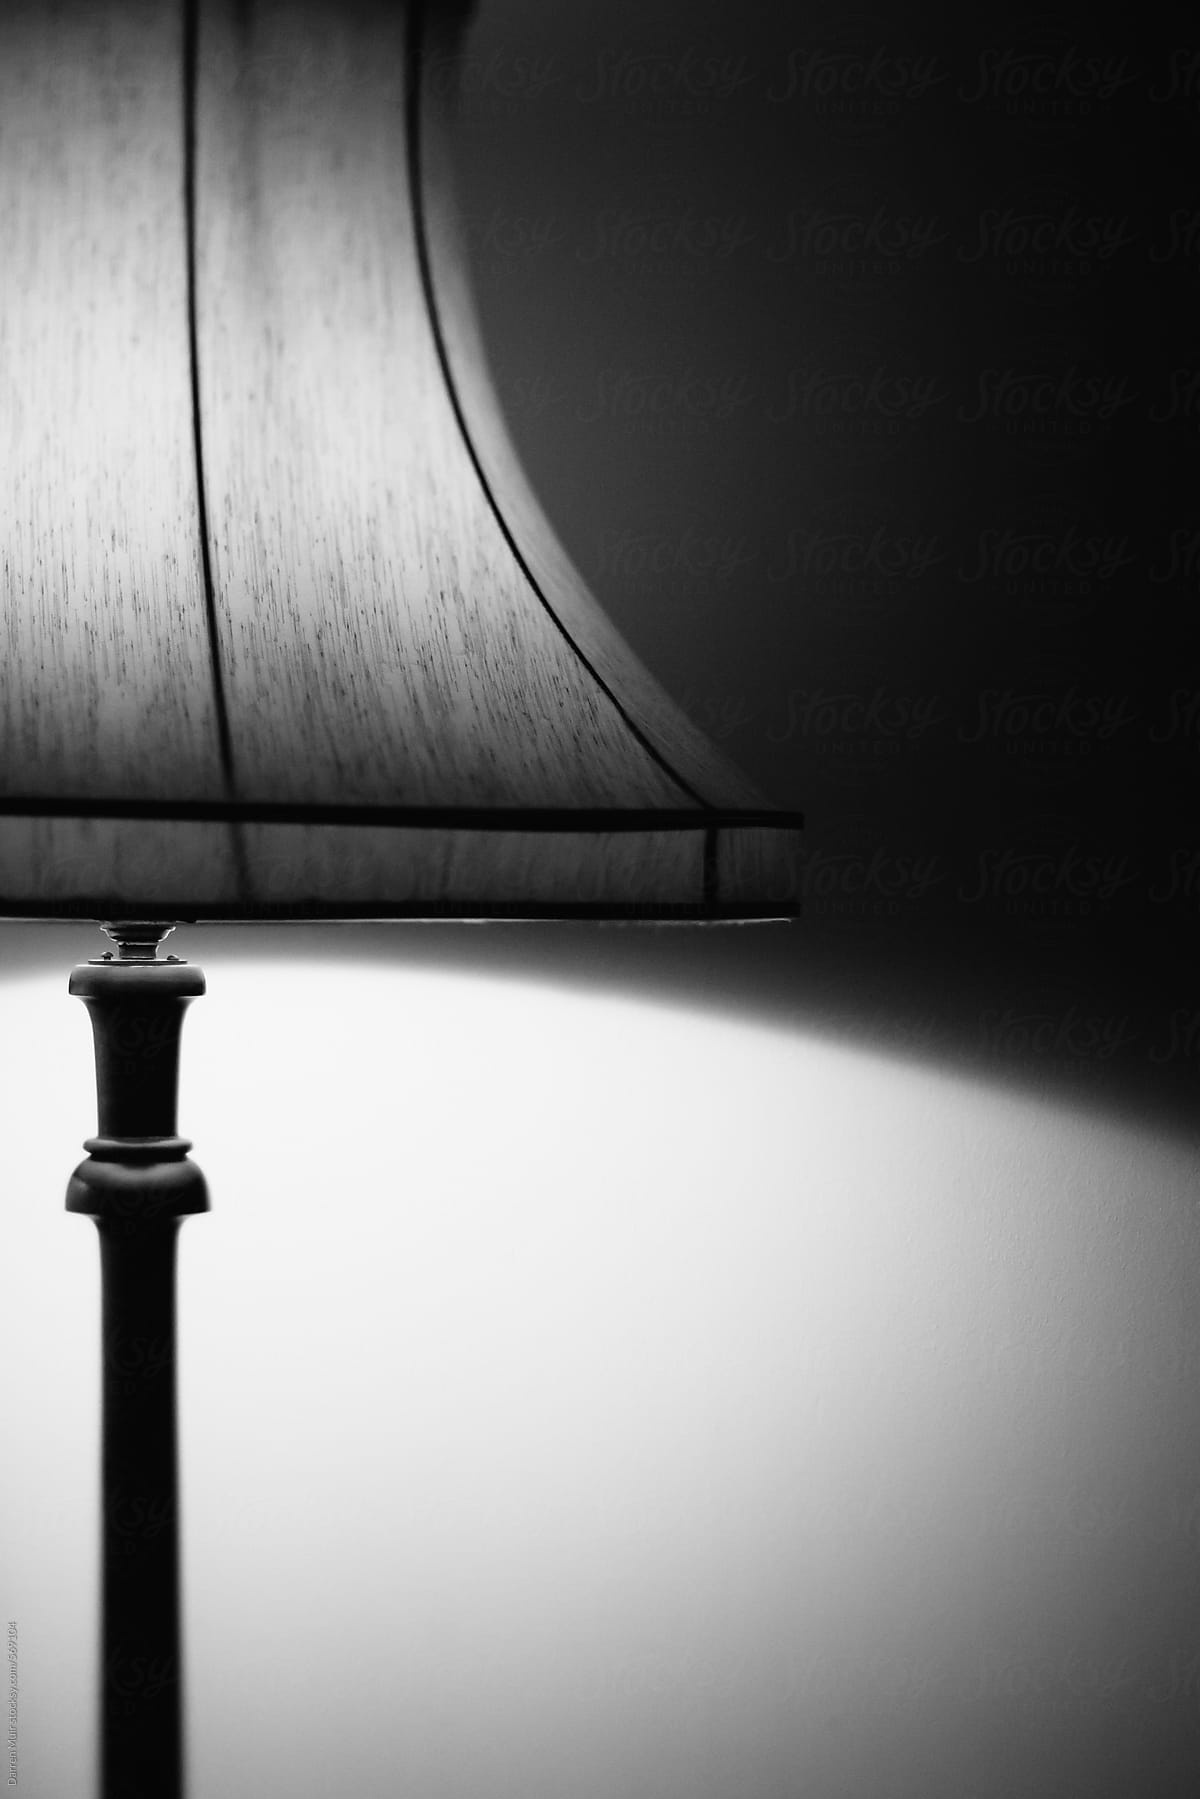 Cropped view of a standard lamp and shade.